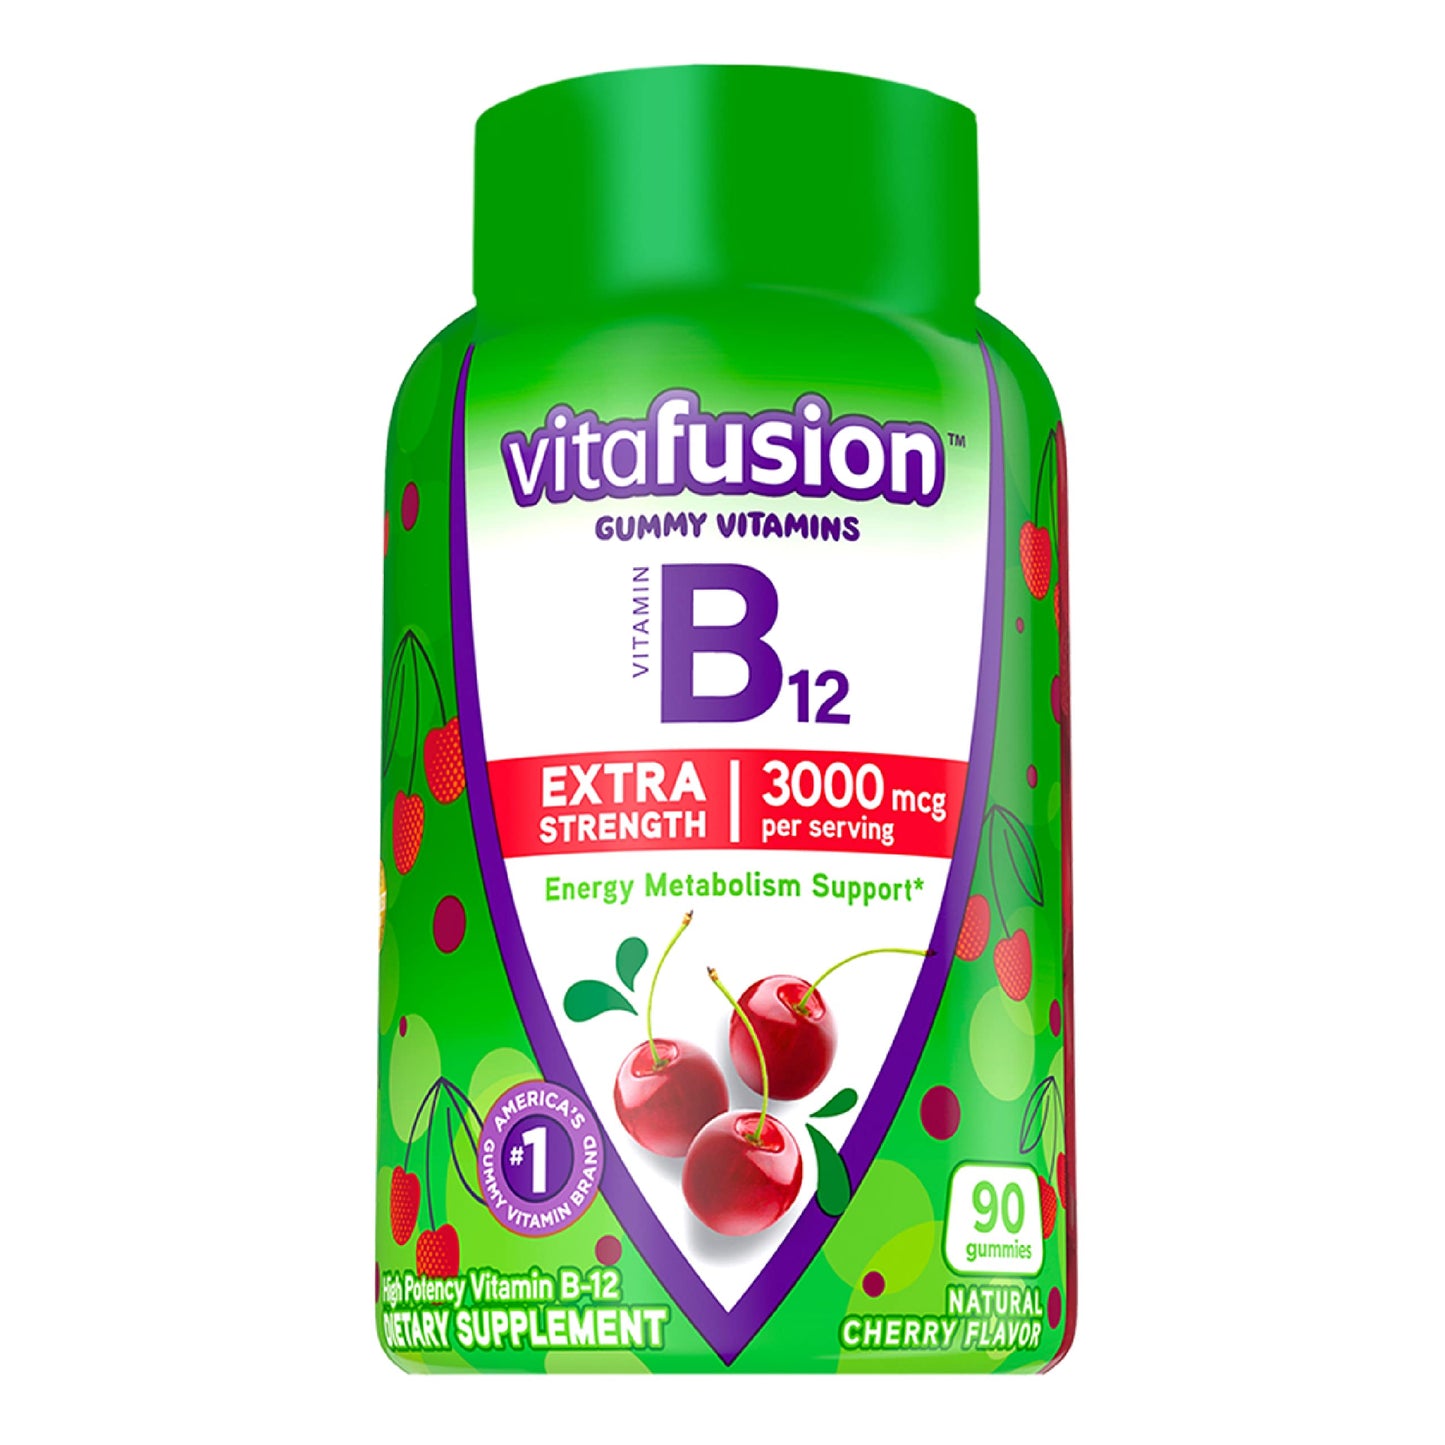 ZHOU Nutrition Elderberry Gummies Immune Support Bundle with Vitafusion Vitamin B12 Gummies Energy Metabolism Support, 60 and 90 Count